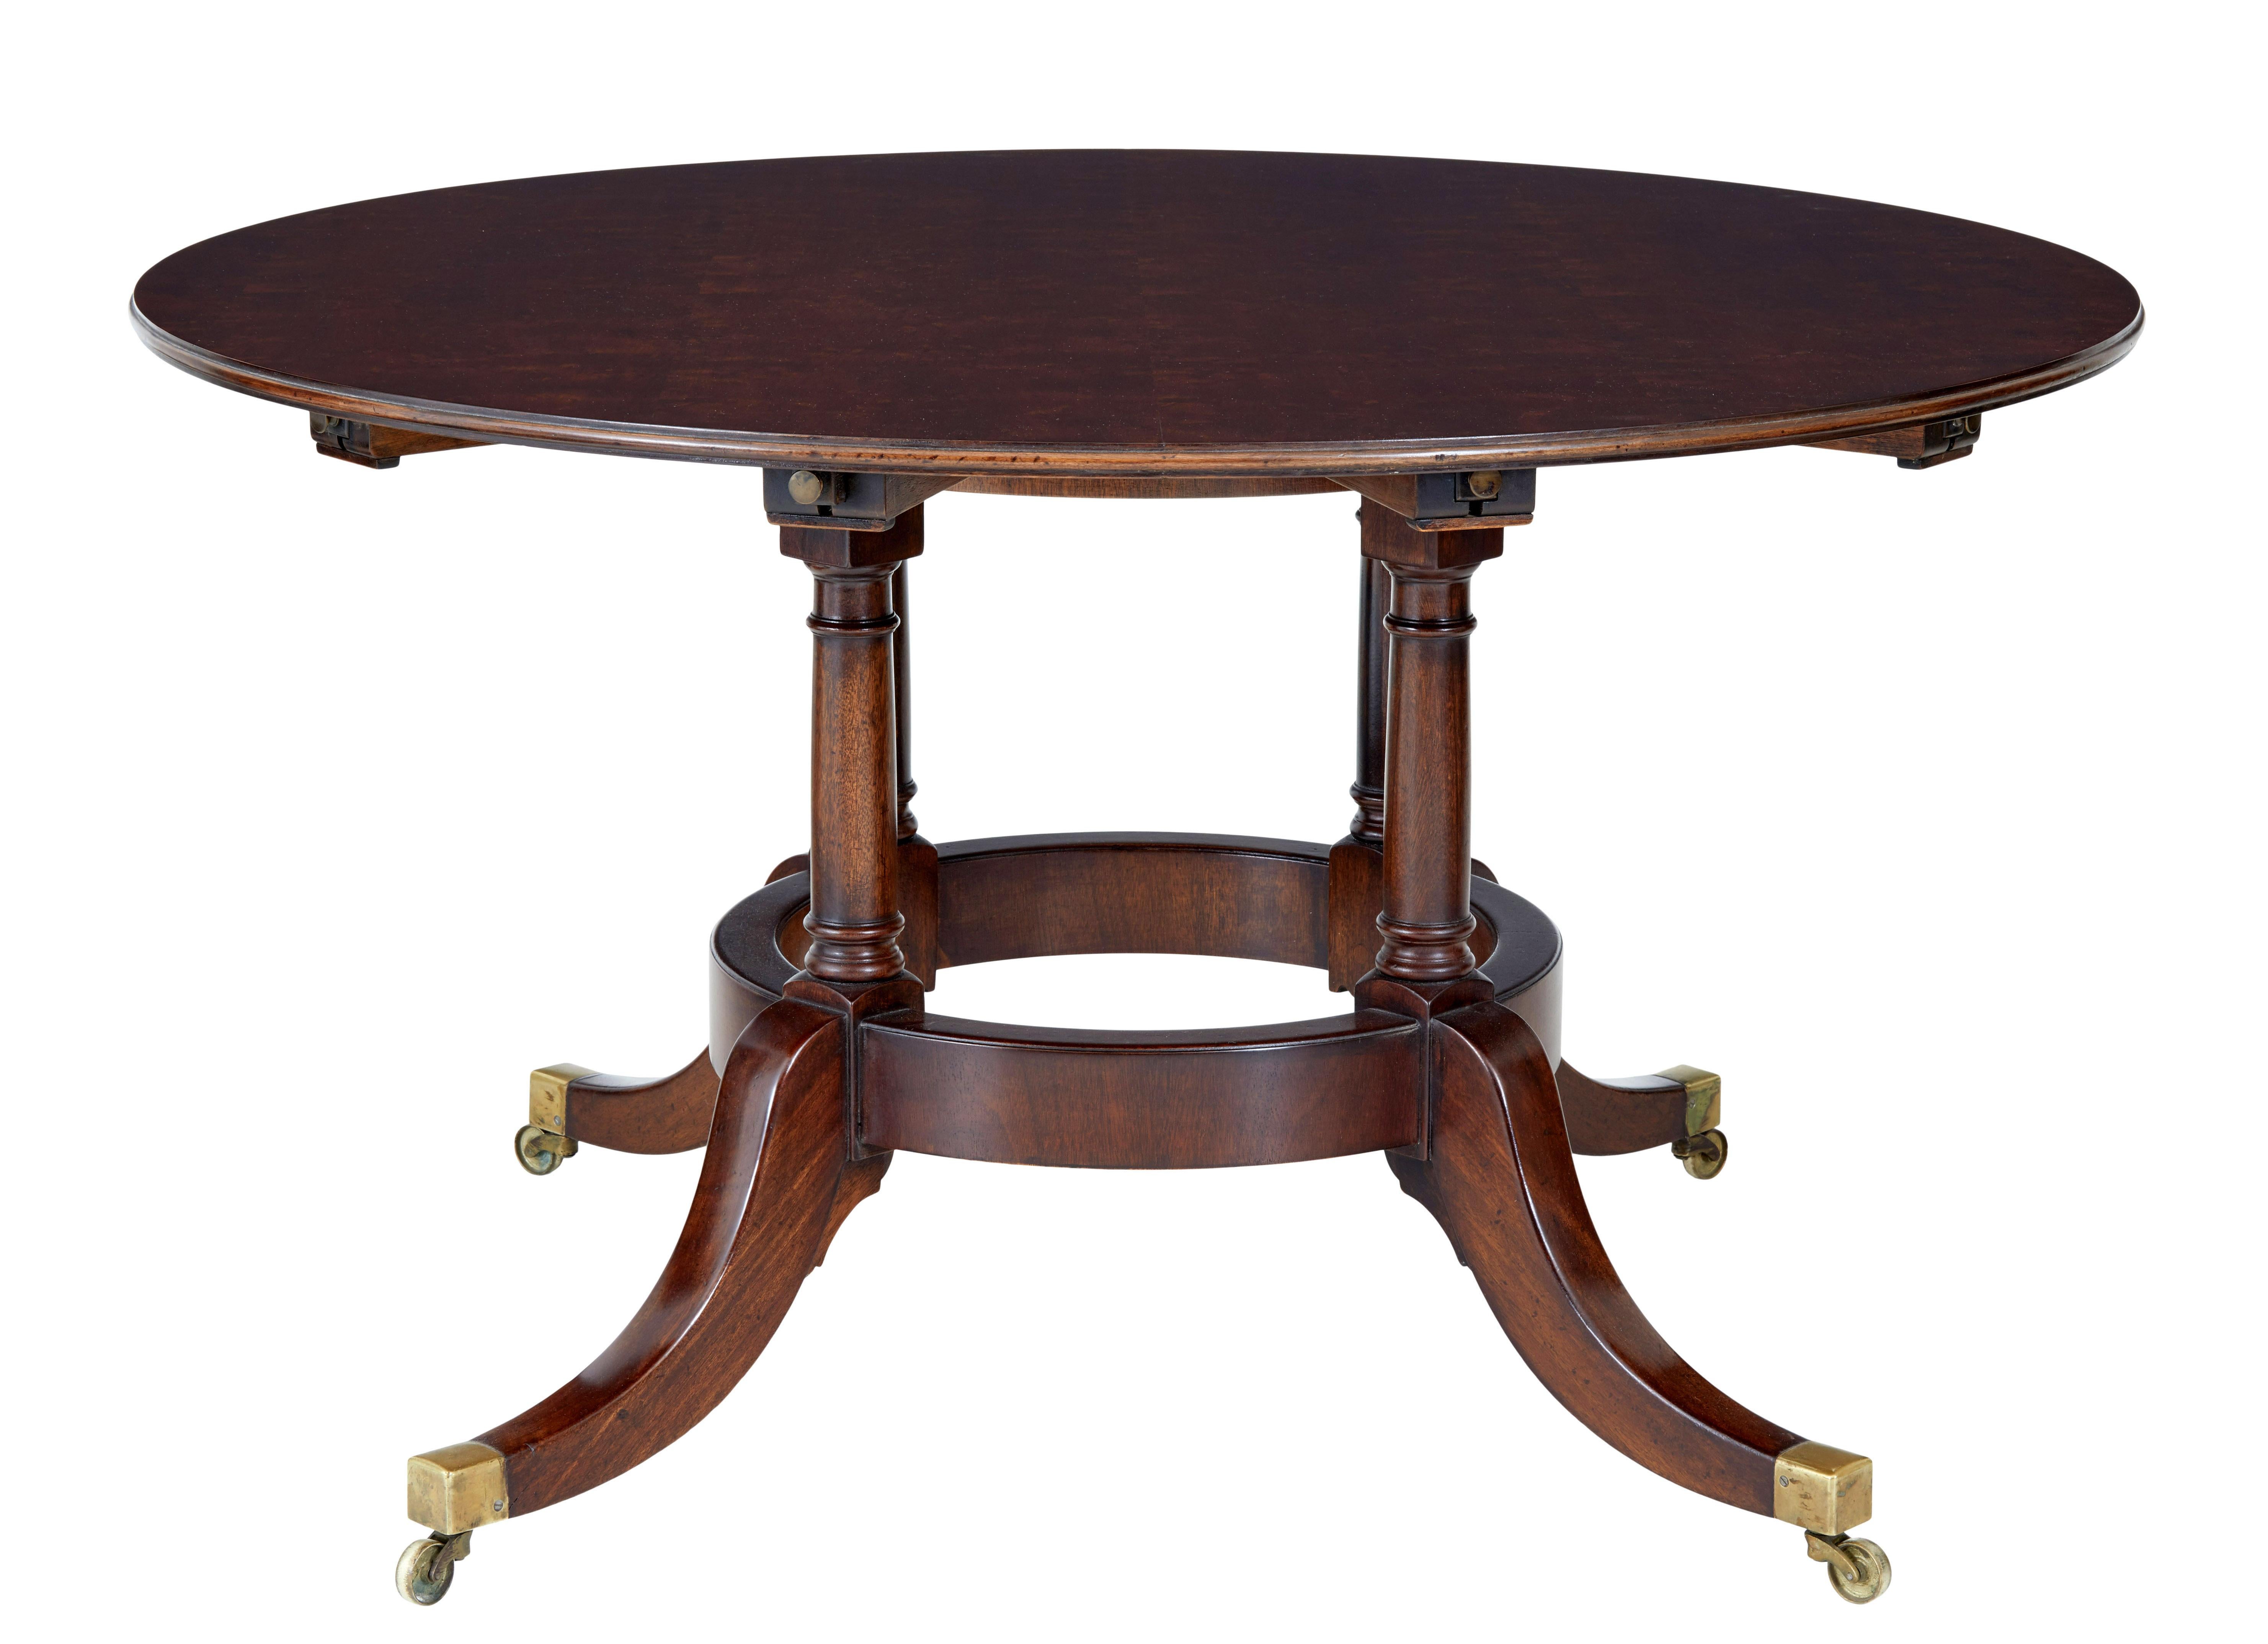 Late 20th century mahogany jupe dining table with leaf cabinet, circa 1990.

Here we offer a beautiful jupe dining table made in mahogany. These tables allow themselves to be extended by adding to the diameter for increased seating.

Circular